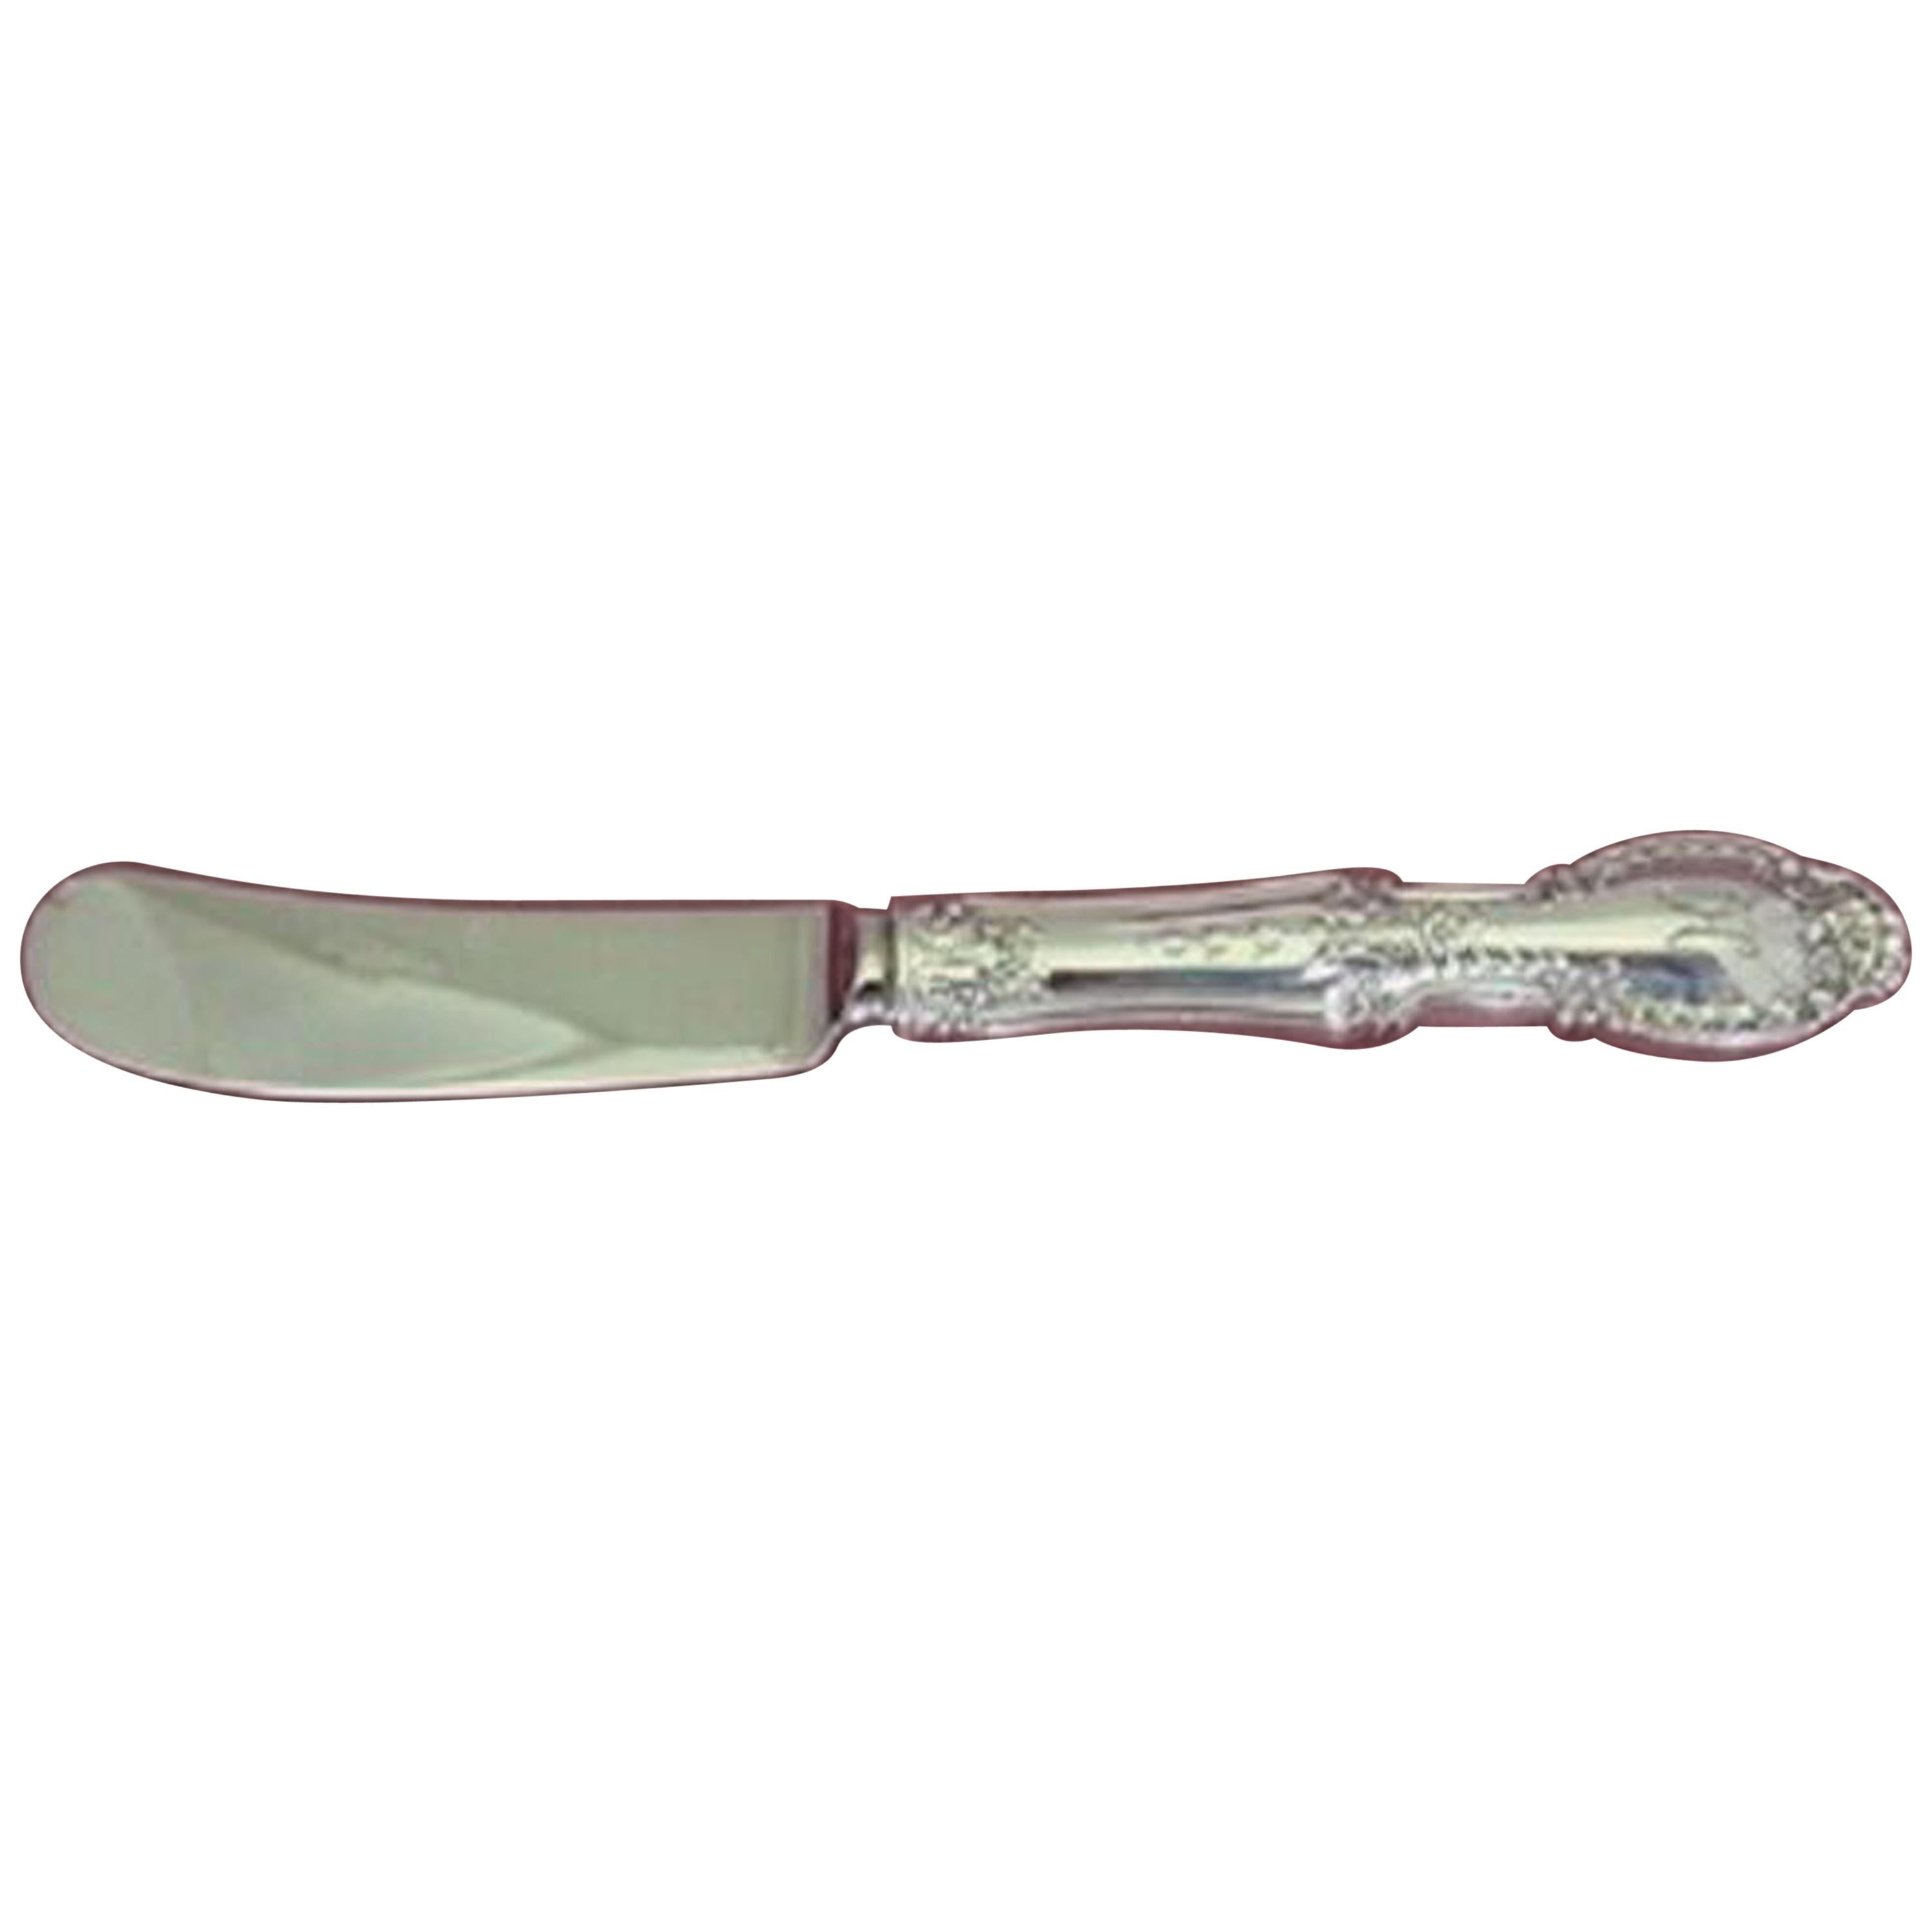 Richelieu by Tiffany and Co. Sterling Silver Butter Spreader Hollow Handle